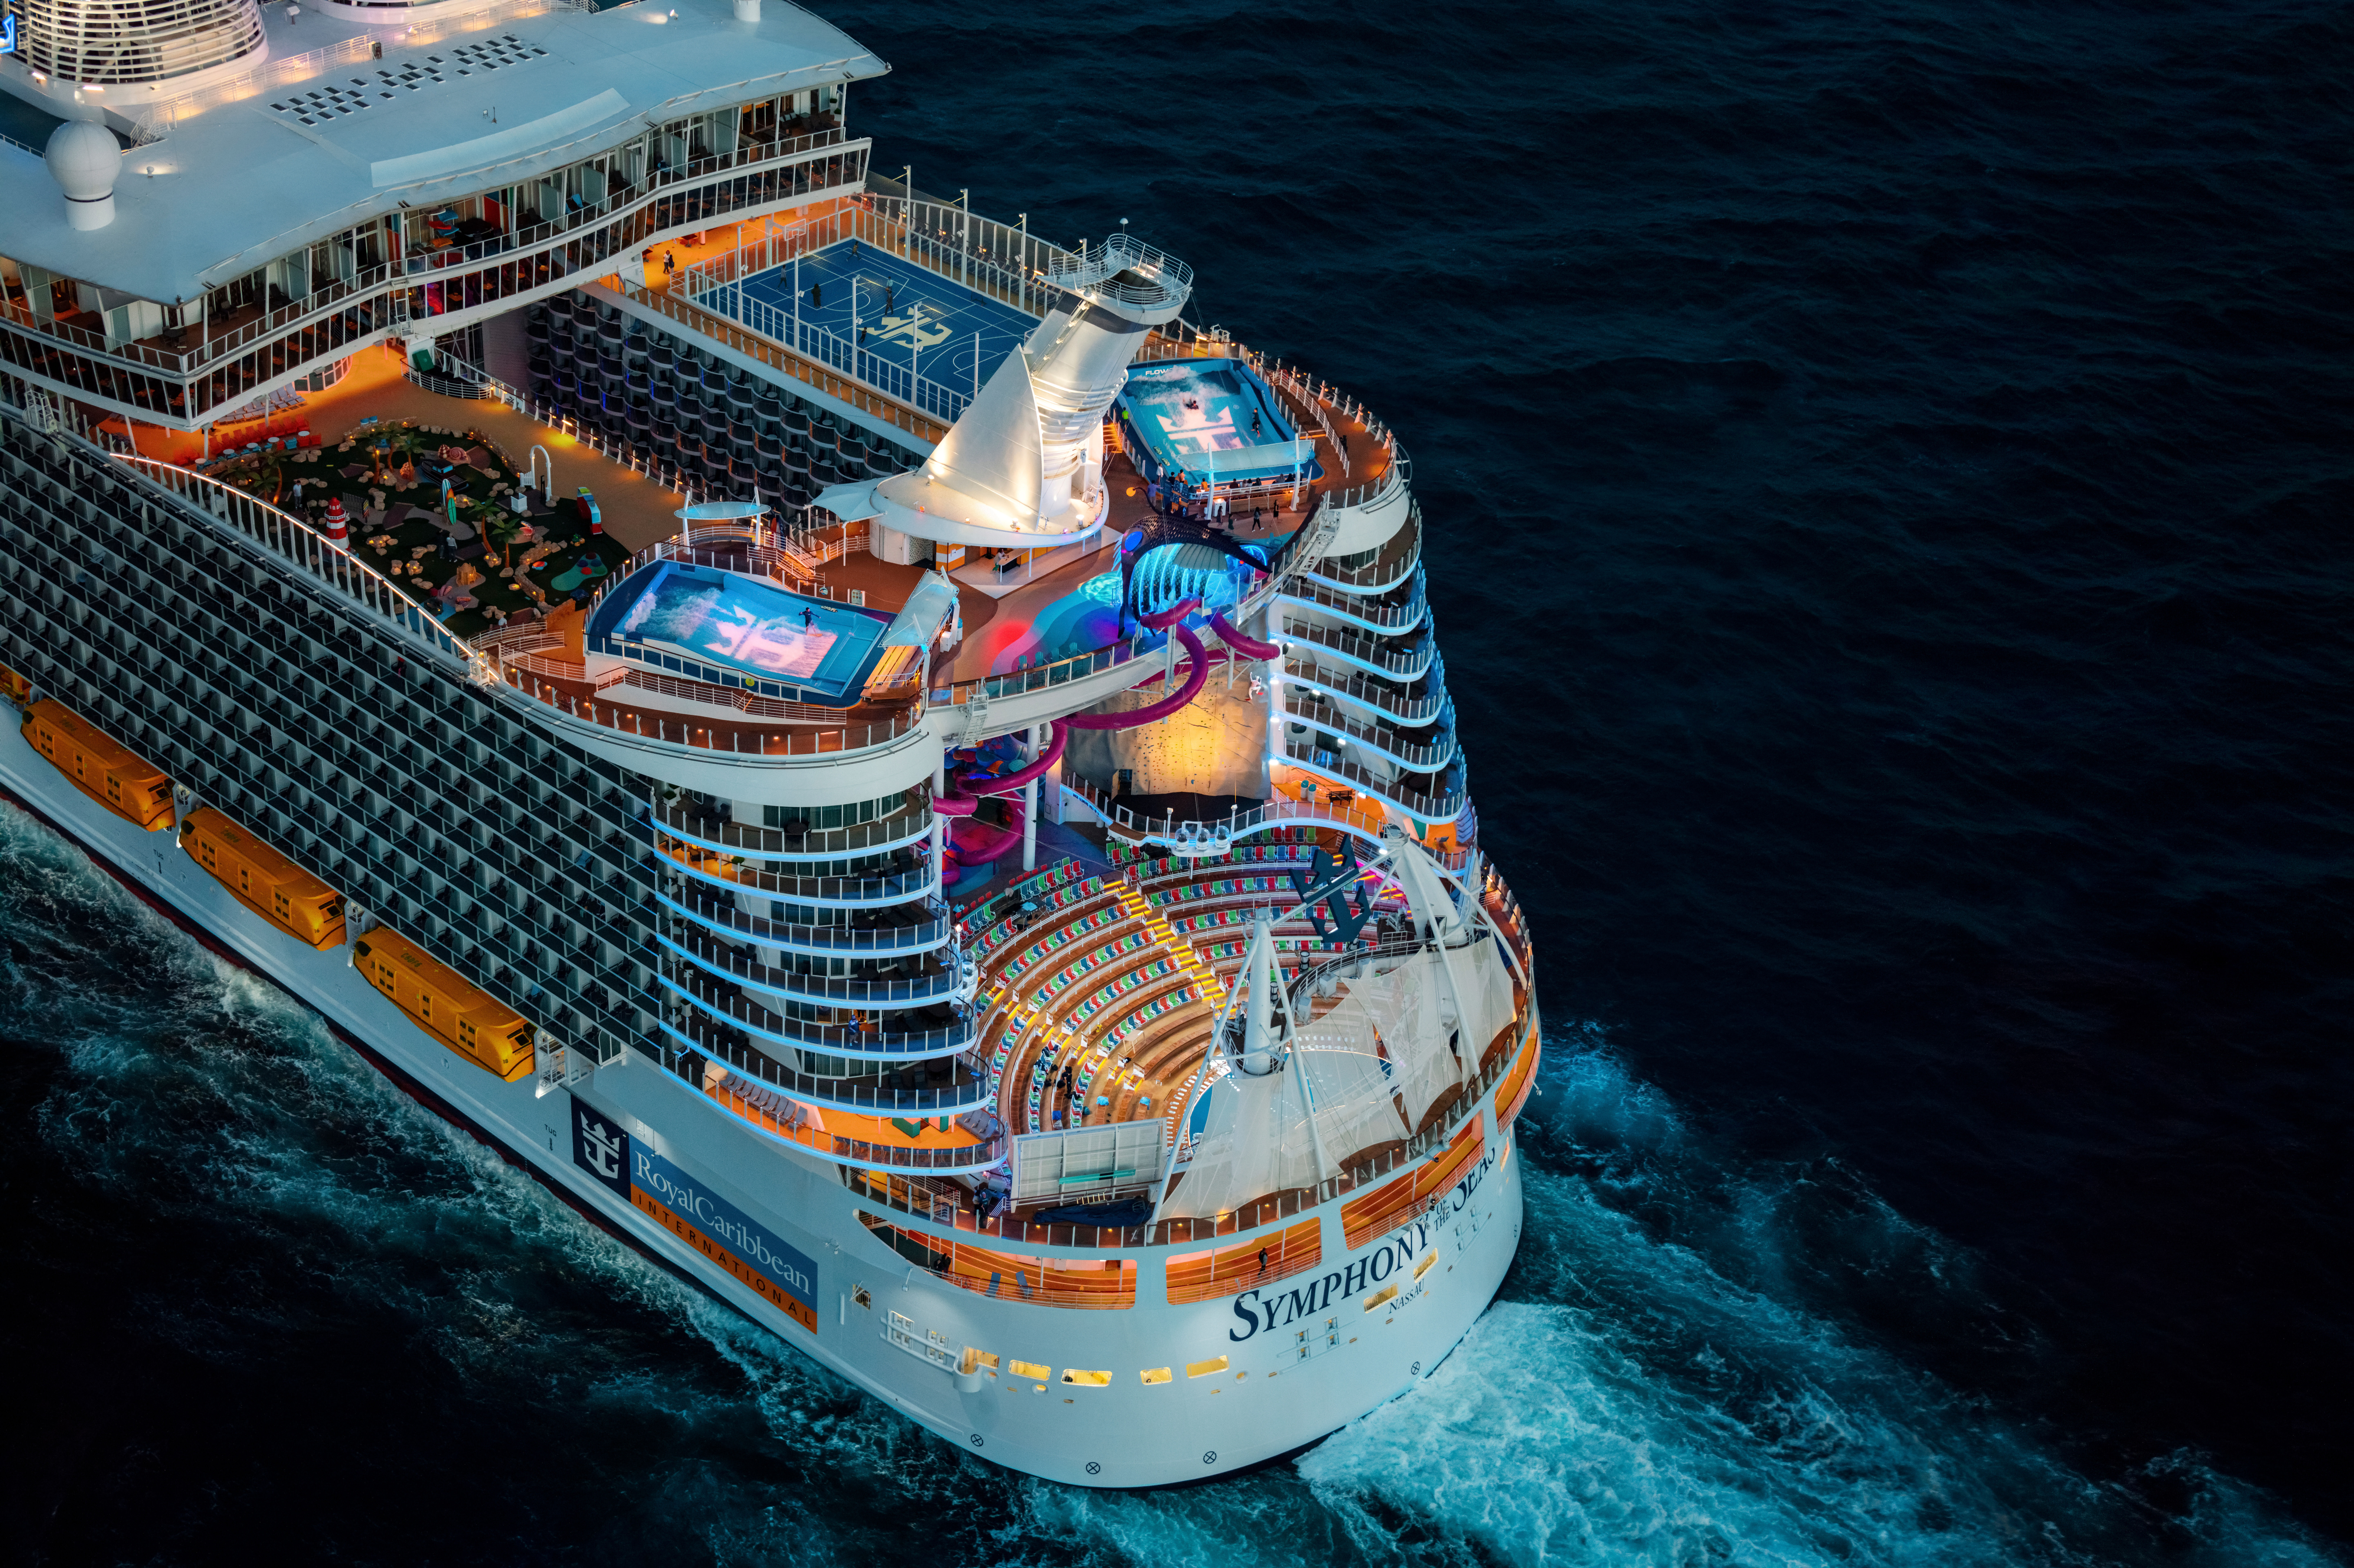 Symphony of the Seas 7-night Eastern Caribbean Cruise March 2, 2025